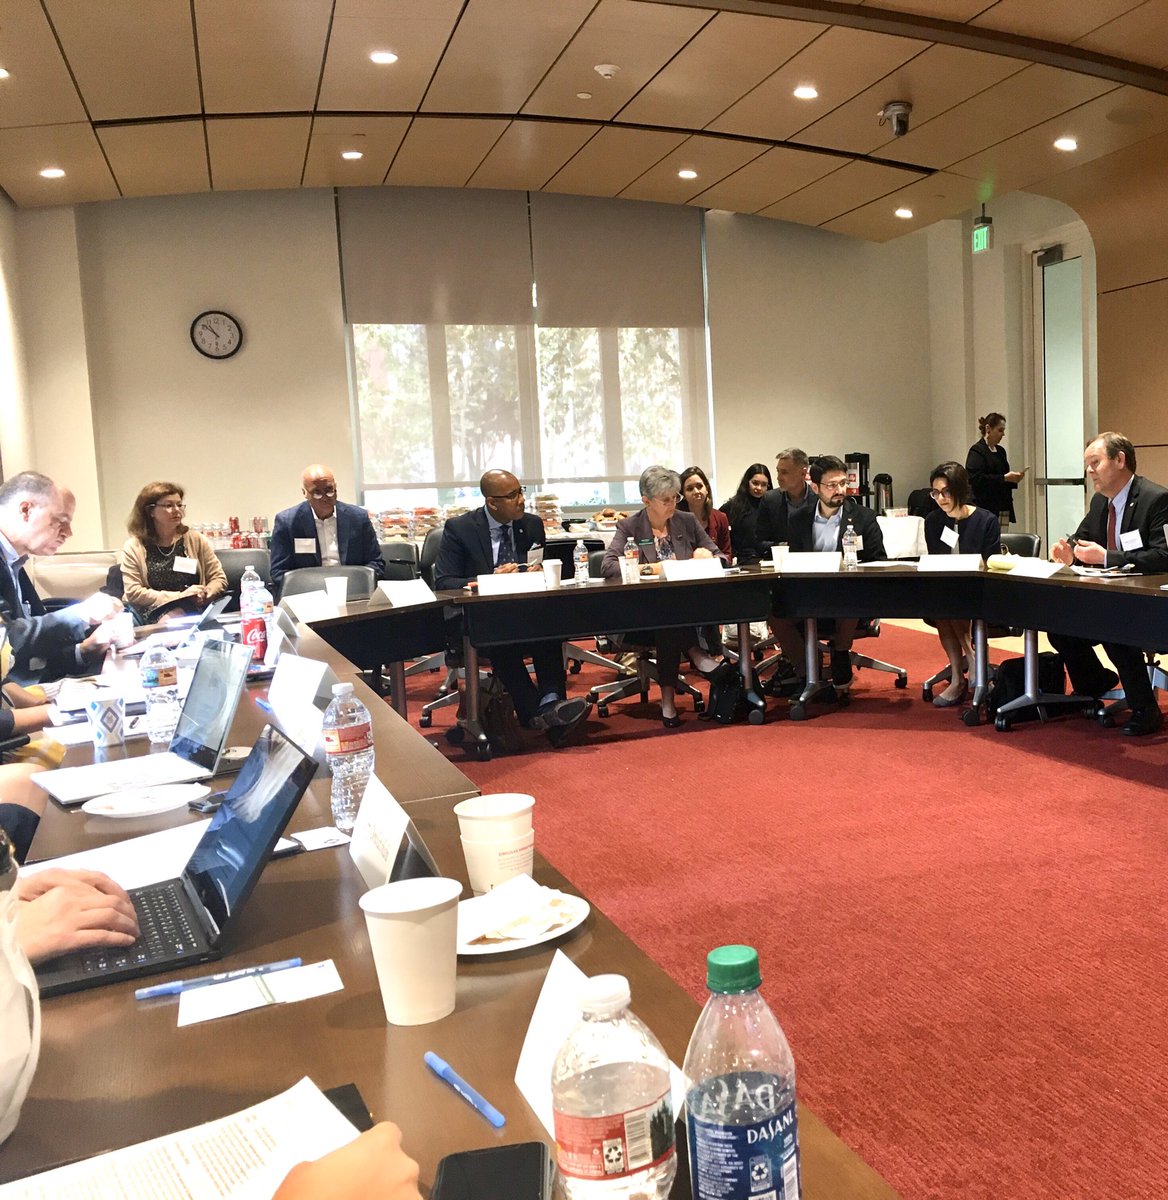 City leaders from across the U.S. came together for the 2nd Annual L.A. Summit on #CityDiplomacy hosted by @LAMayorsOffice and @PublicDiplomacy to share experiences in governance, community engagement, and city diplomacy 🌎